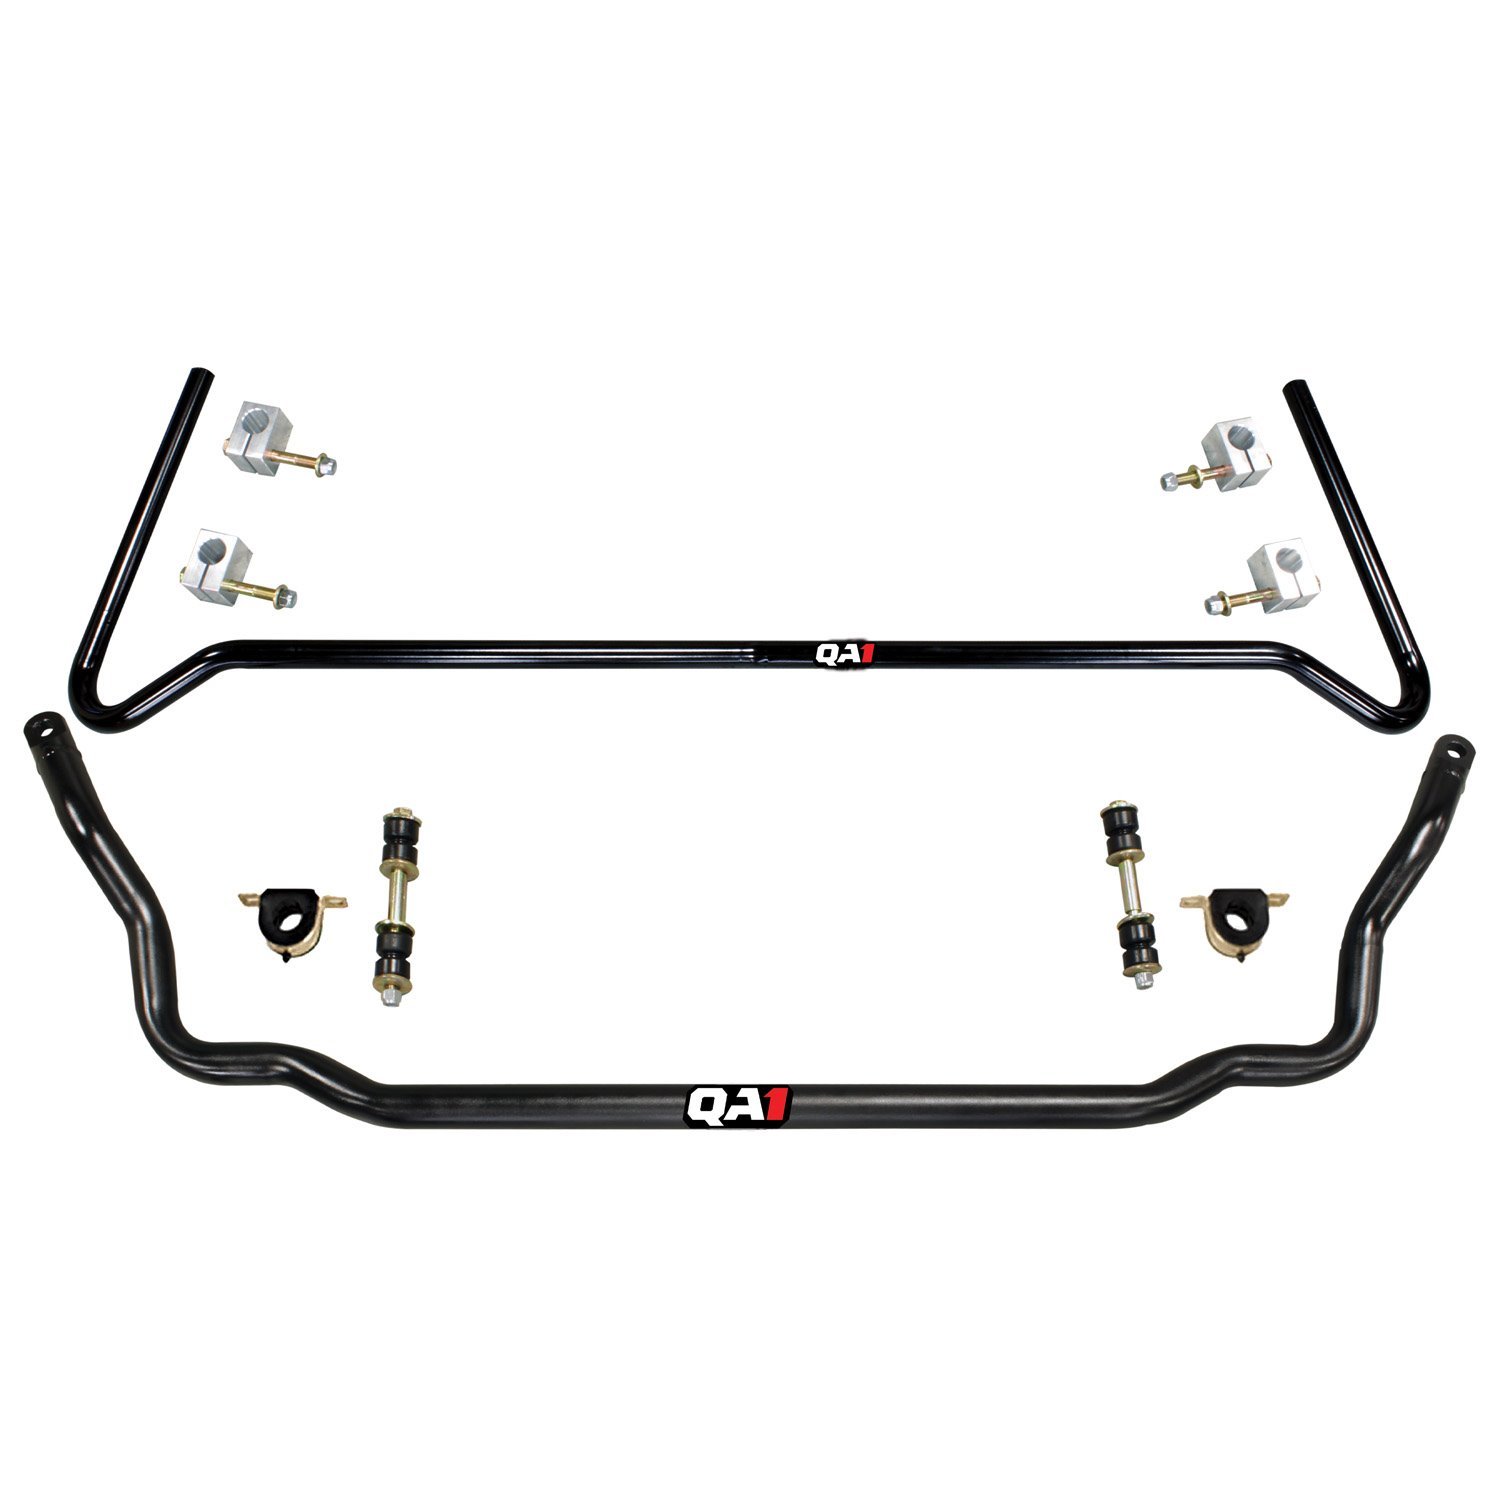 Sway Bar Set for 1973-1977 GM A-Body